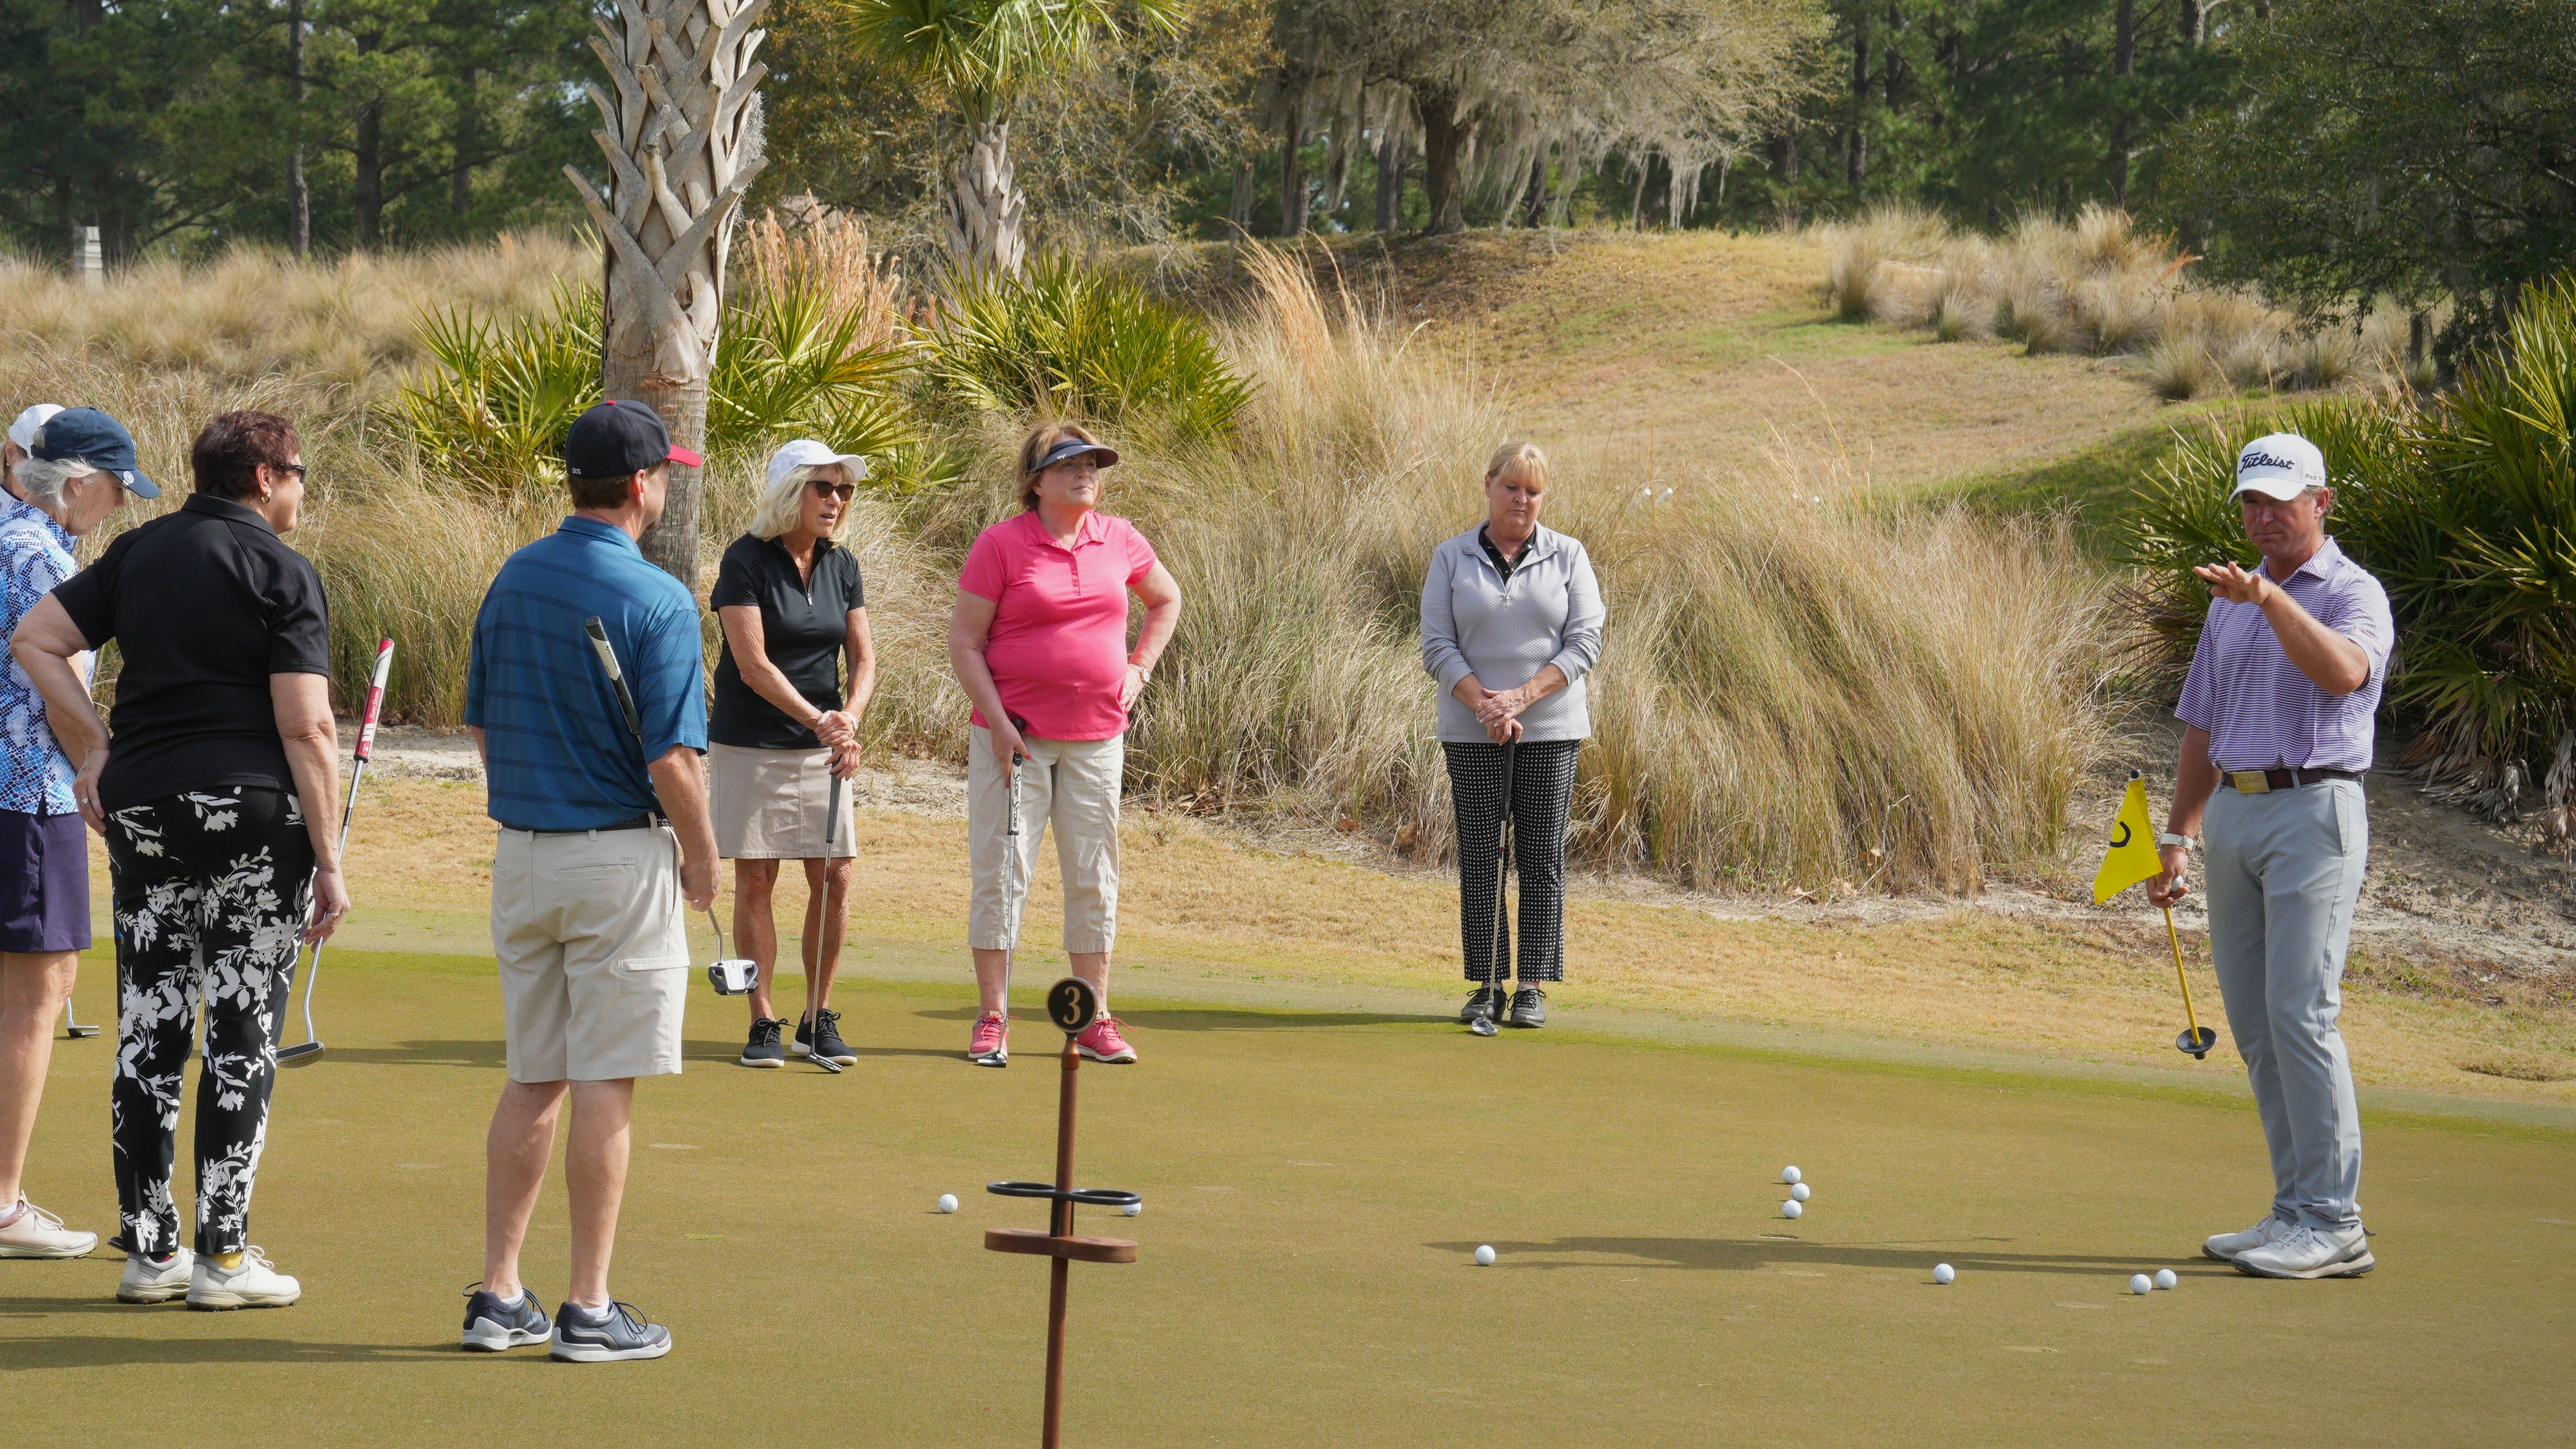 Bruce Wilkins (far right) during a group lesson at Belfair in Bluffton, South Carolina.